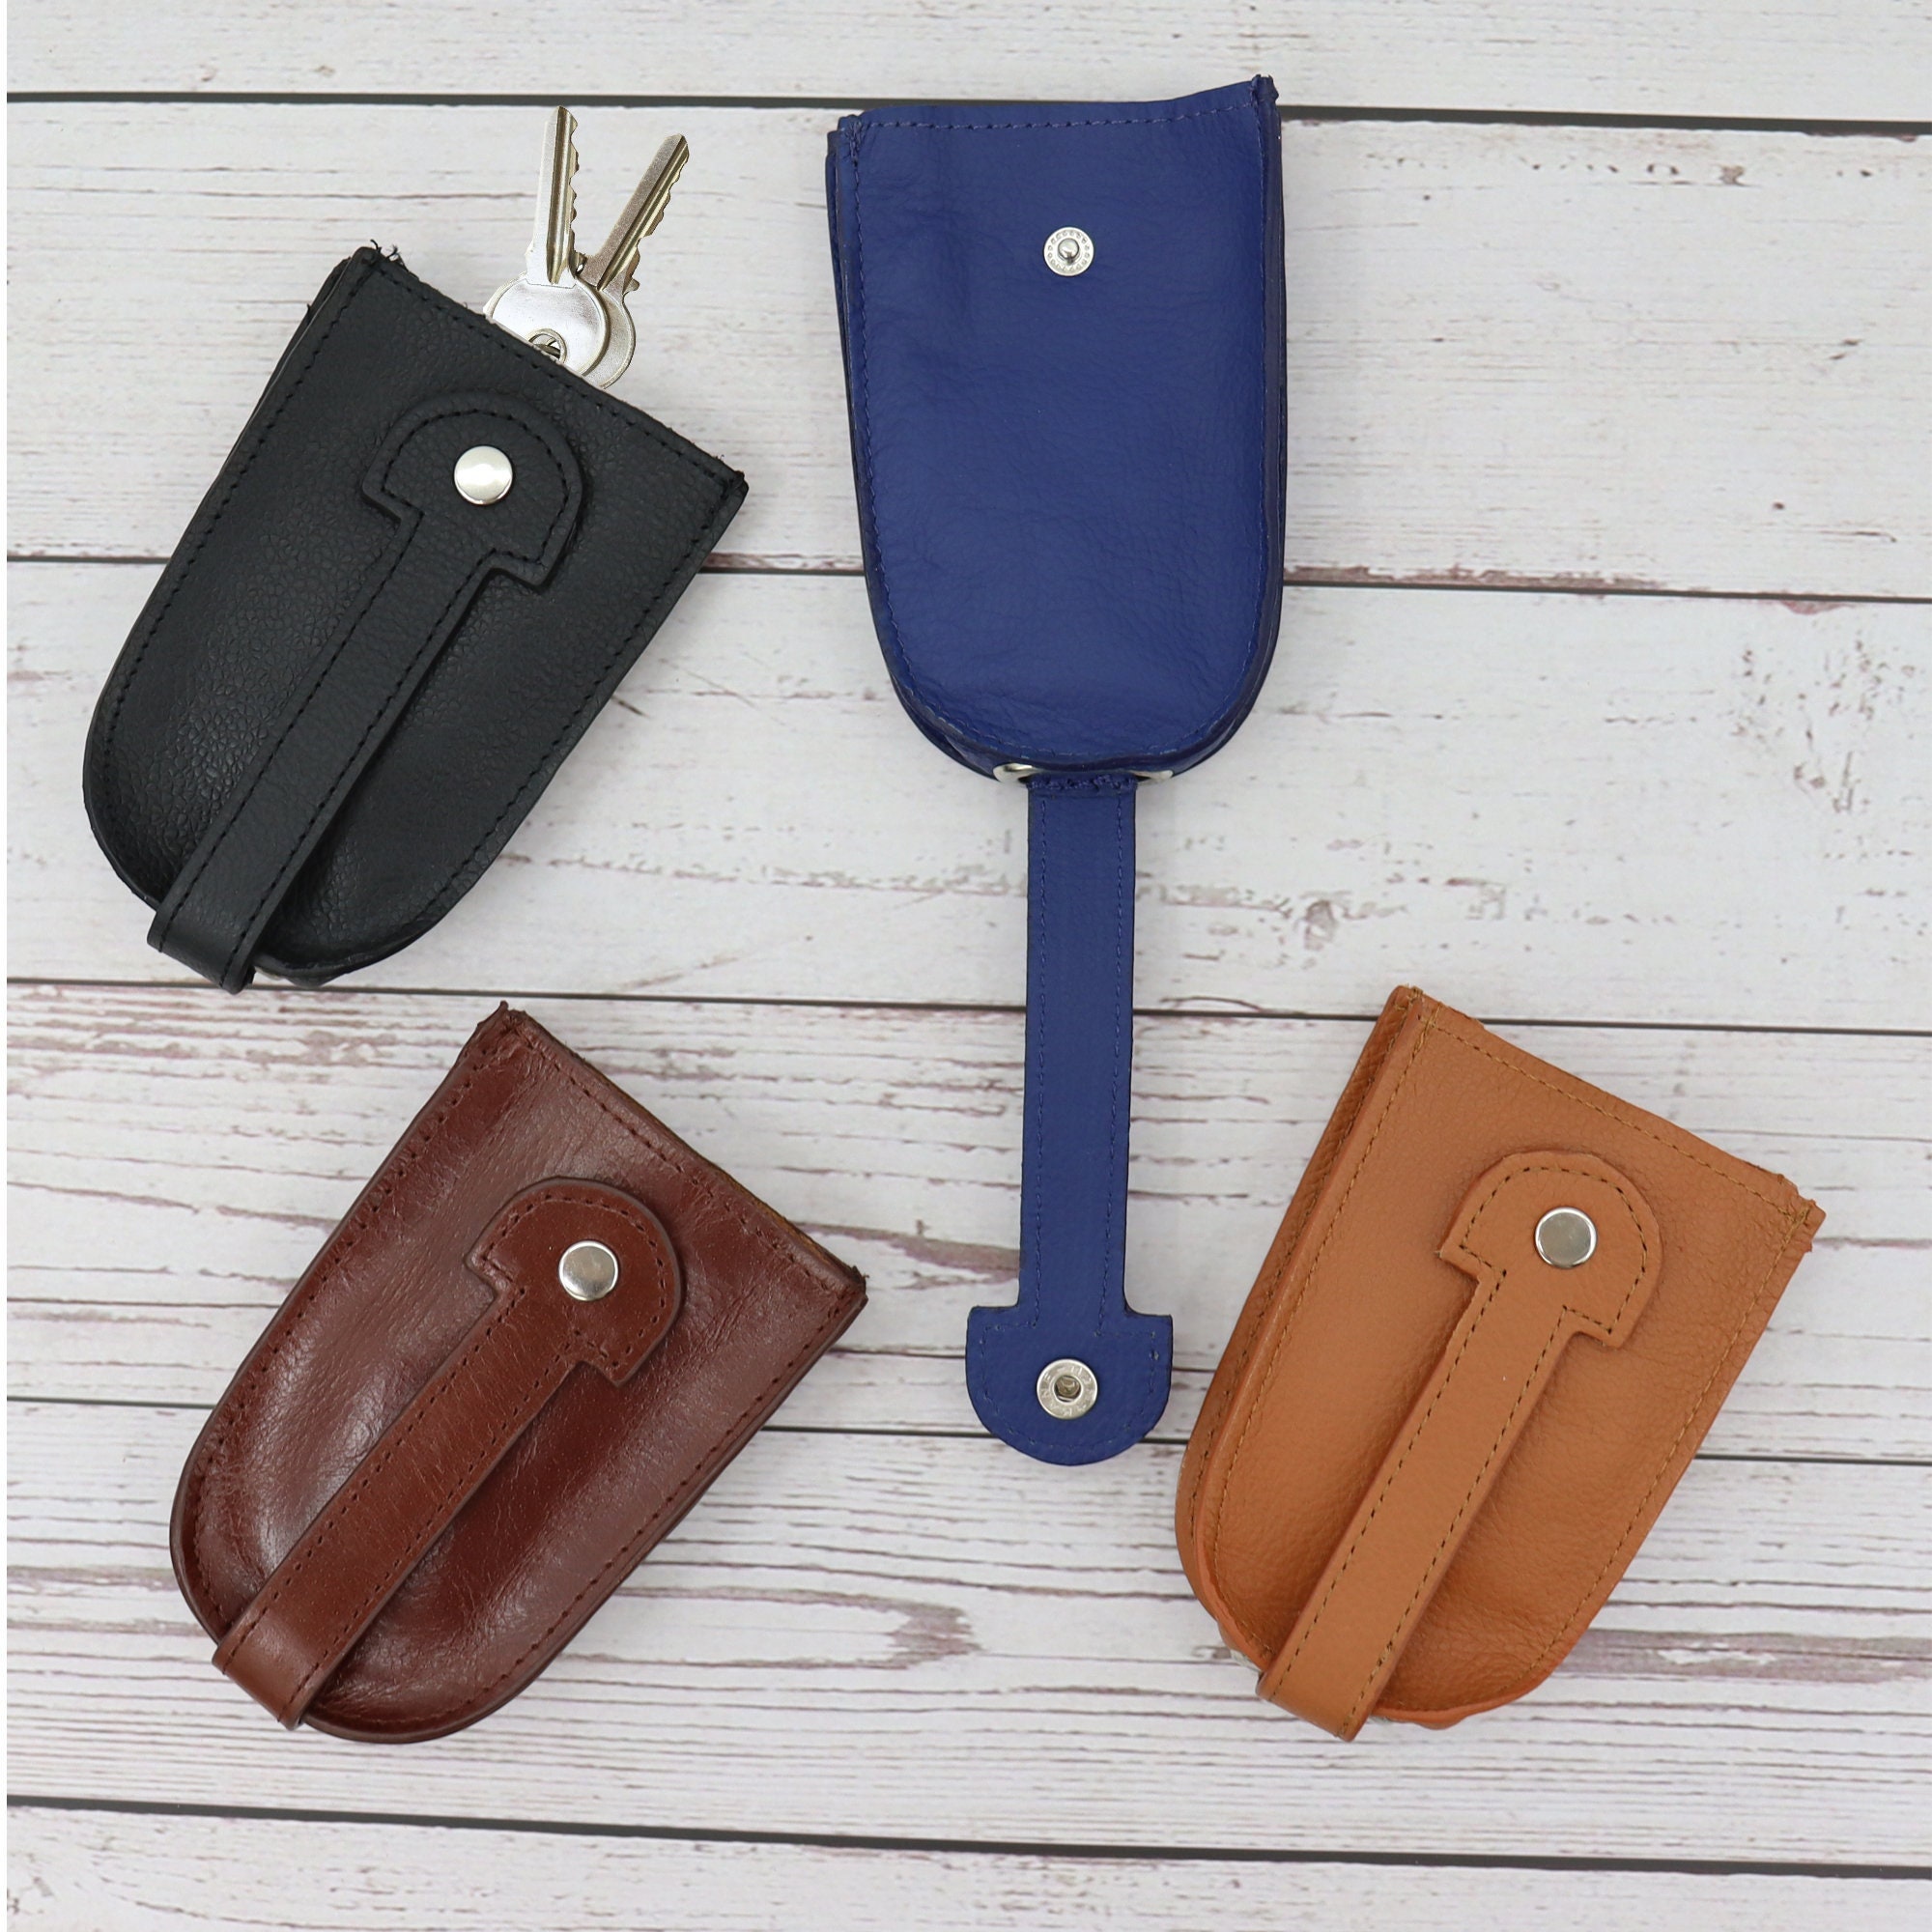 Leather Key Bell Purse Bag Charm  Leather Hang Tag Accessories - Luggage Tag  Handbag - Aliexpress